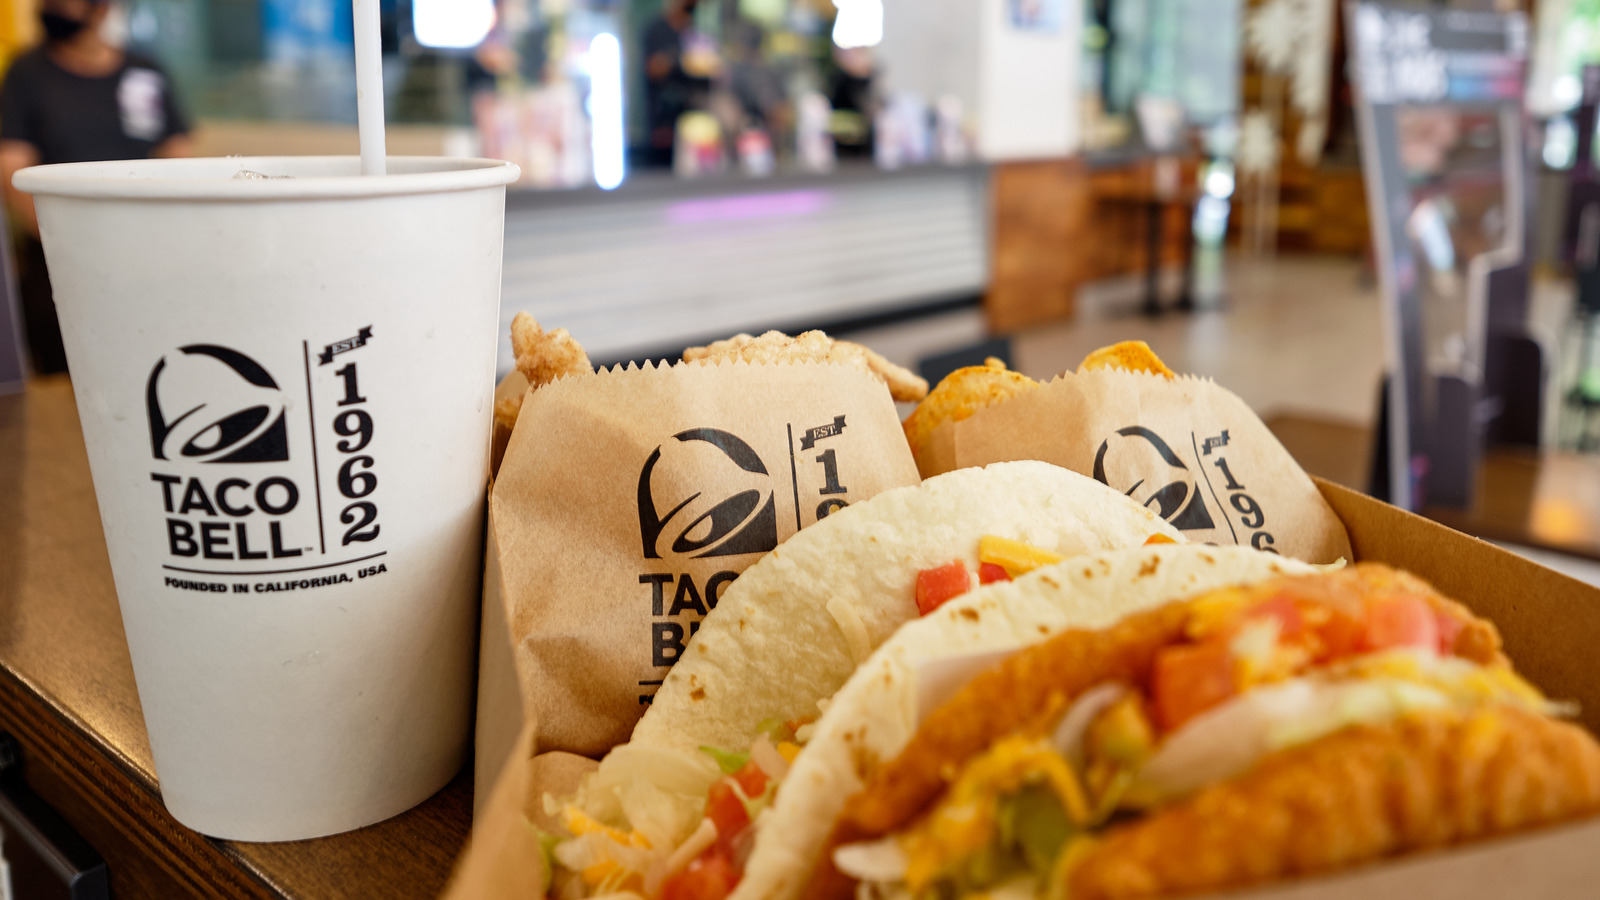 Taco Bell's Rat Poisoning Case Just Came To A Screeching Halt